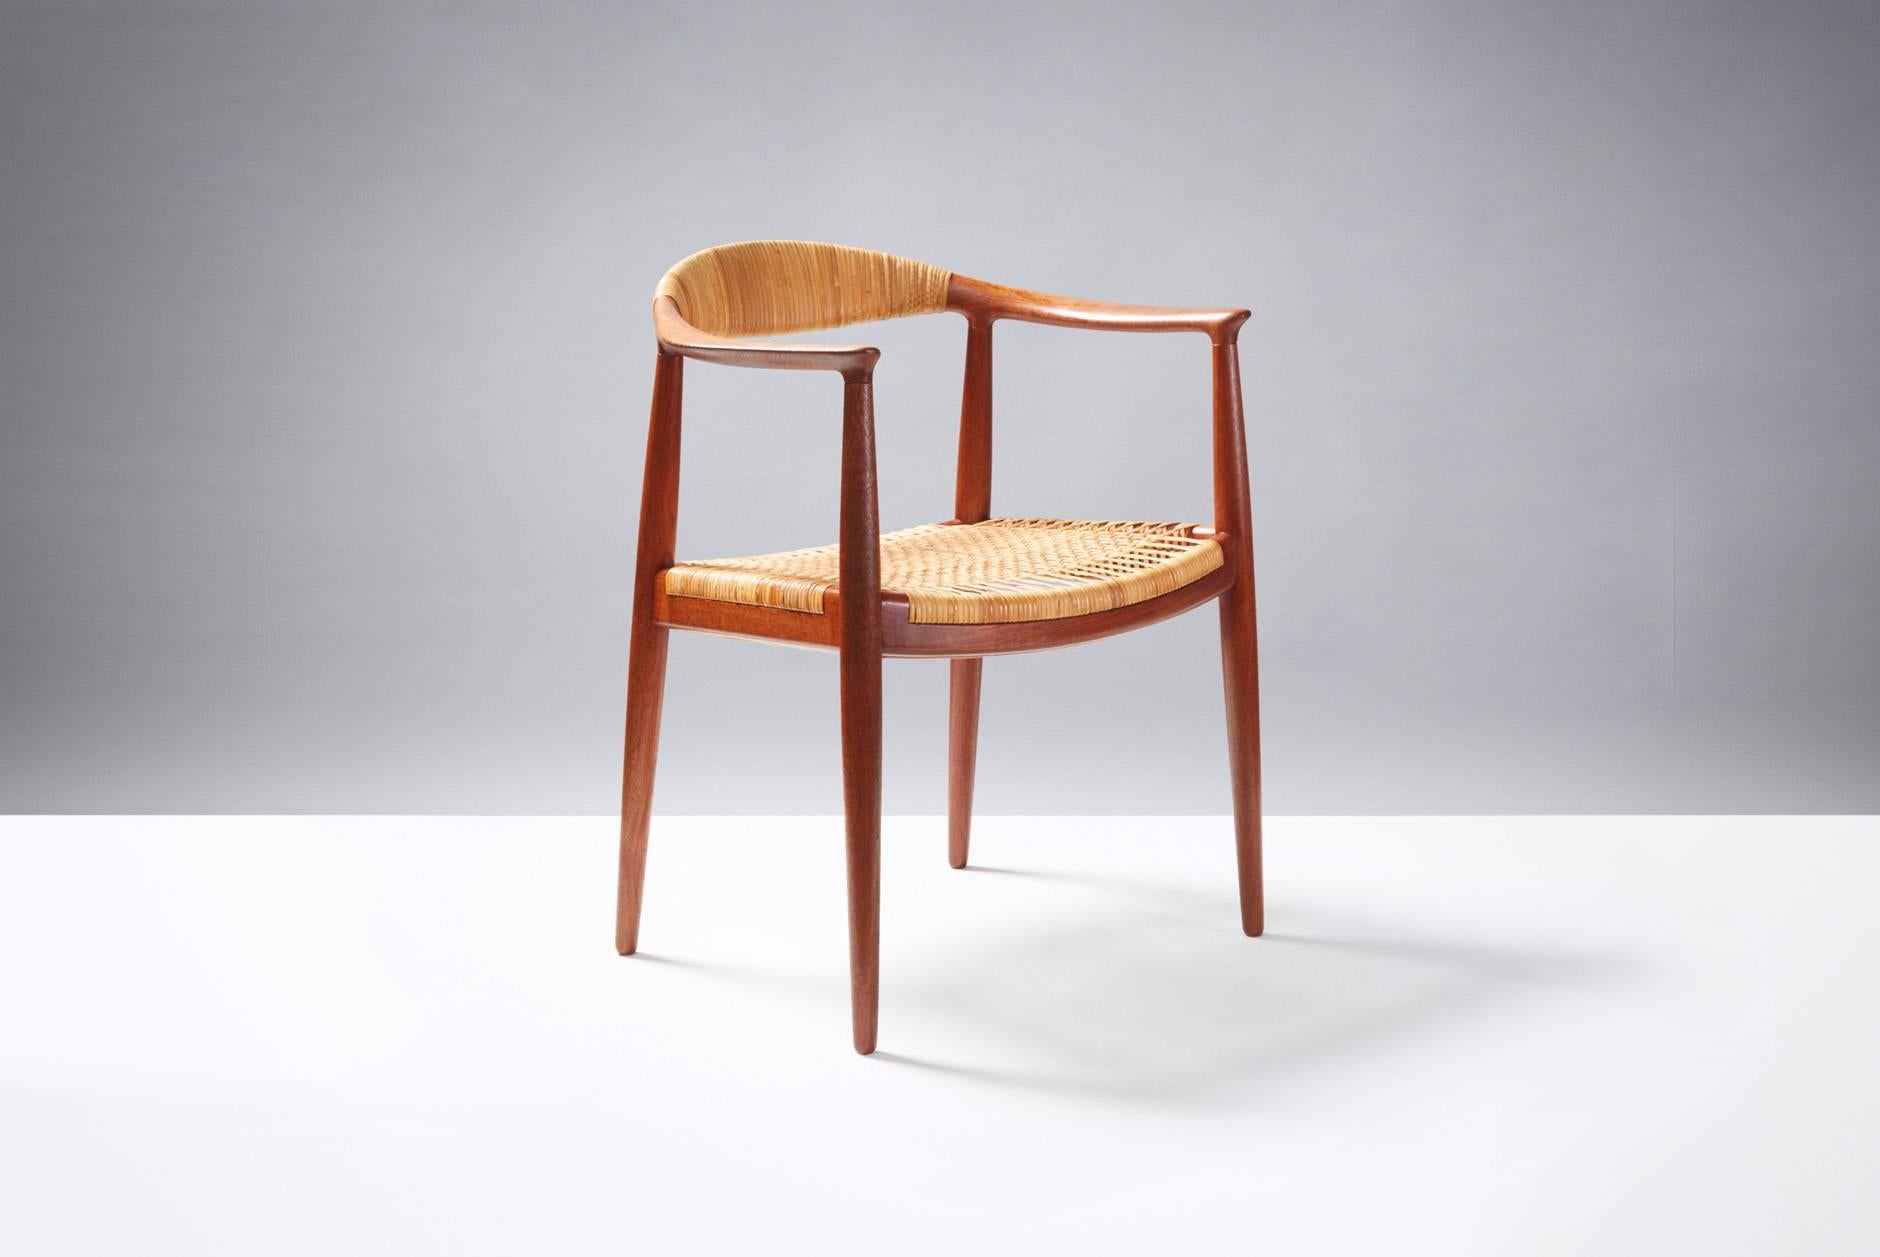 Early production of Wegner's most iconic design. Beautifully patinated, aged Burmese teak frame with woven rattan seat and backrest. Later versions were without the rattan wrap on the backrest. Produced by Johannes Hansen, Denmark. Original rattan